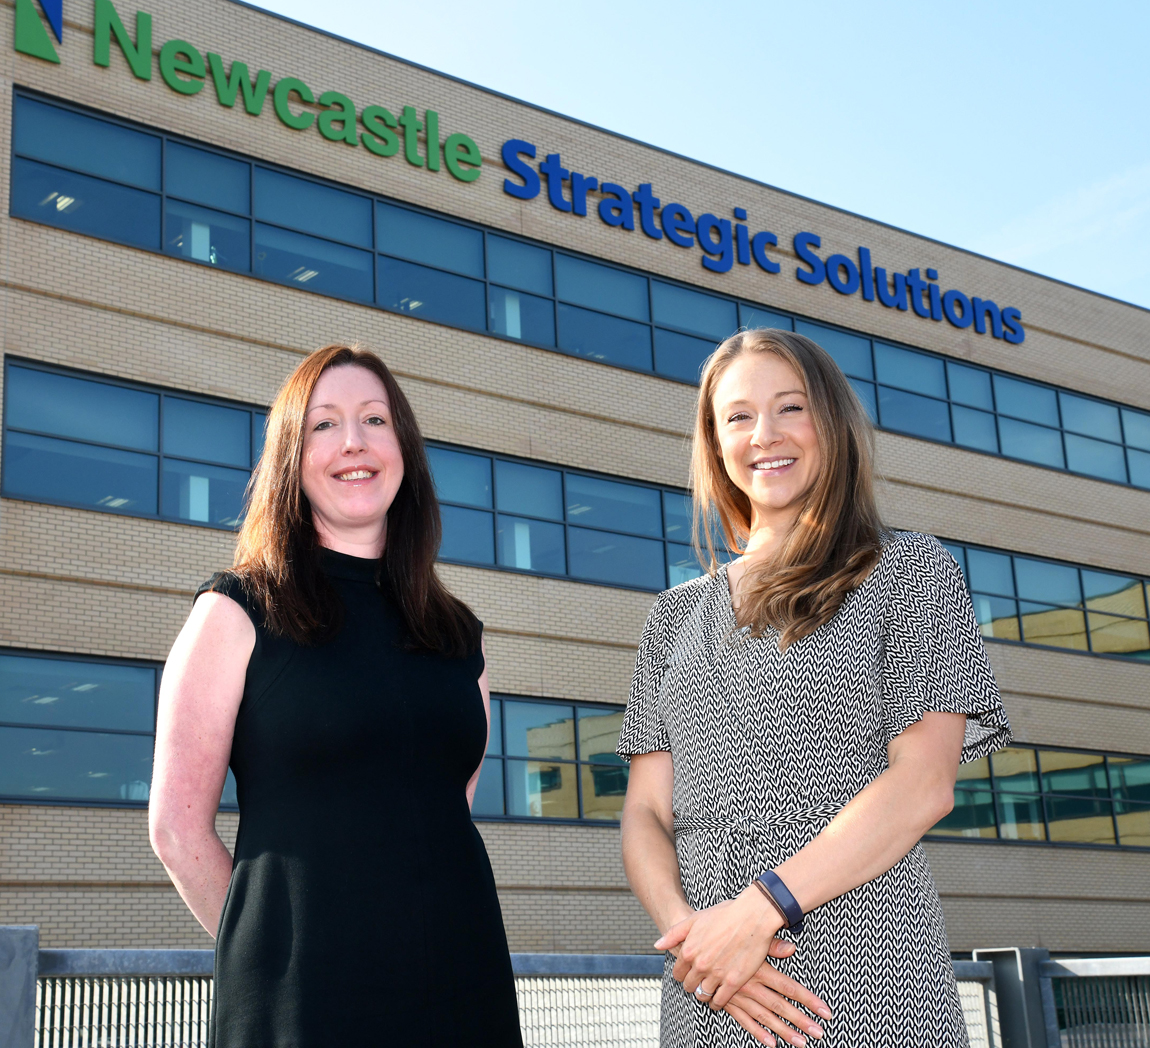 Two new recruits secured for client services expansion